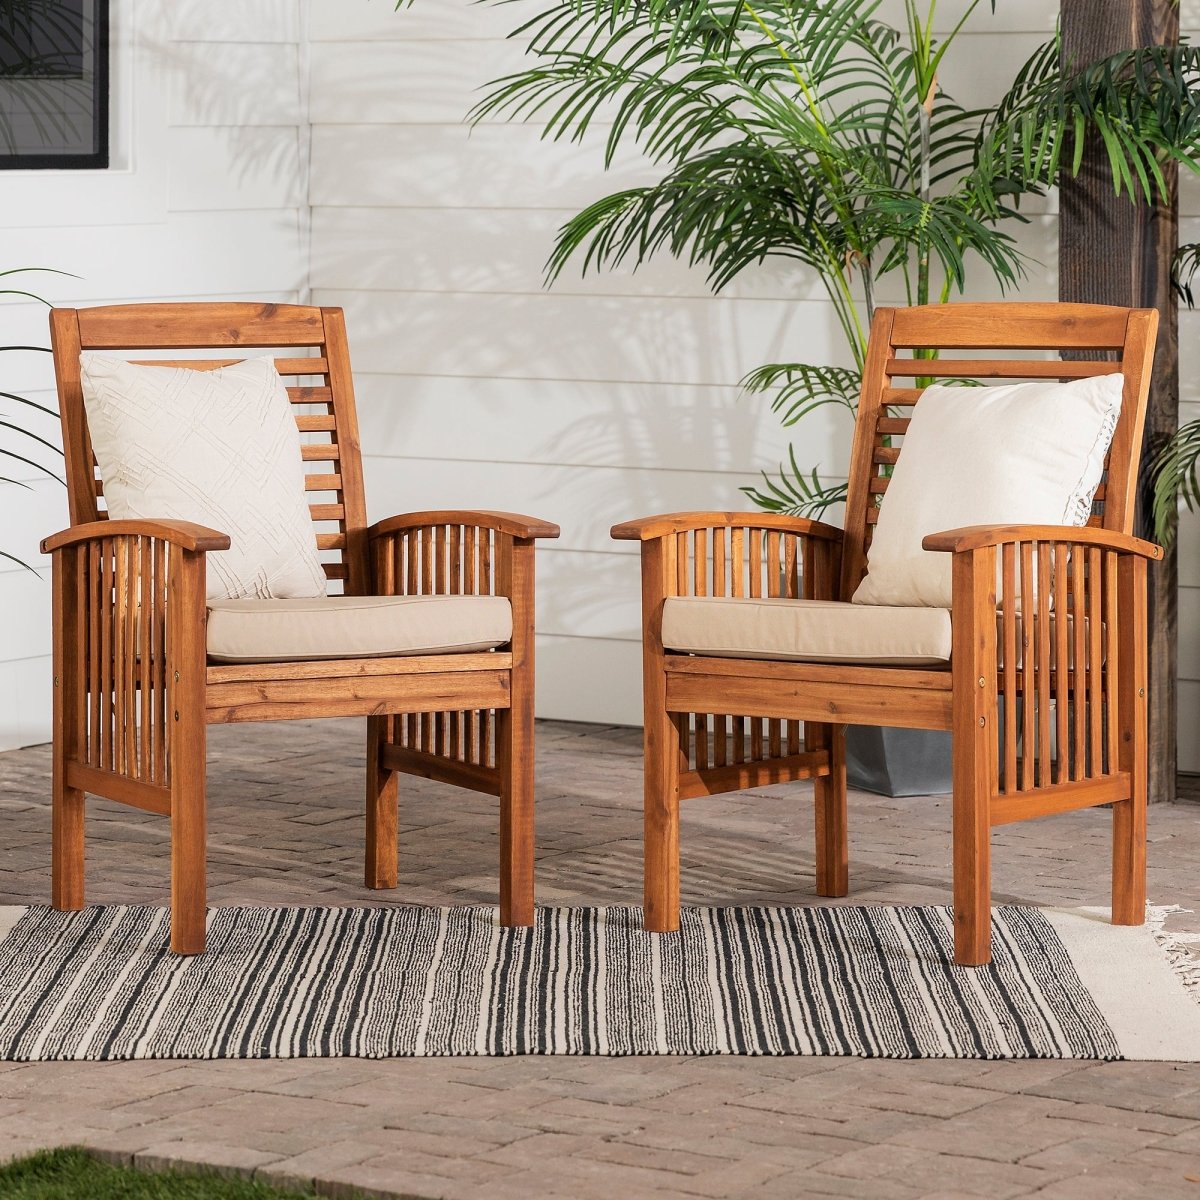 Walker Edison Midland Outdoor Patio Chairs with Cushions, Set of 2 - lily & onyx